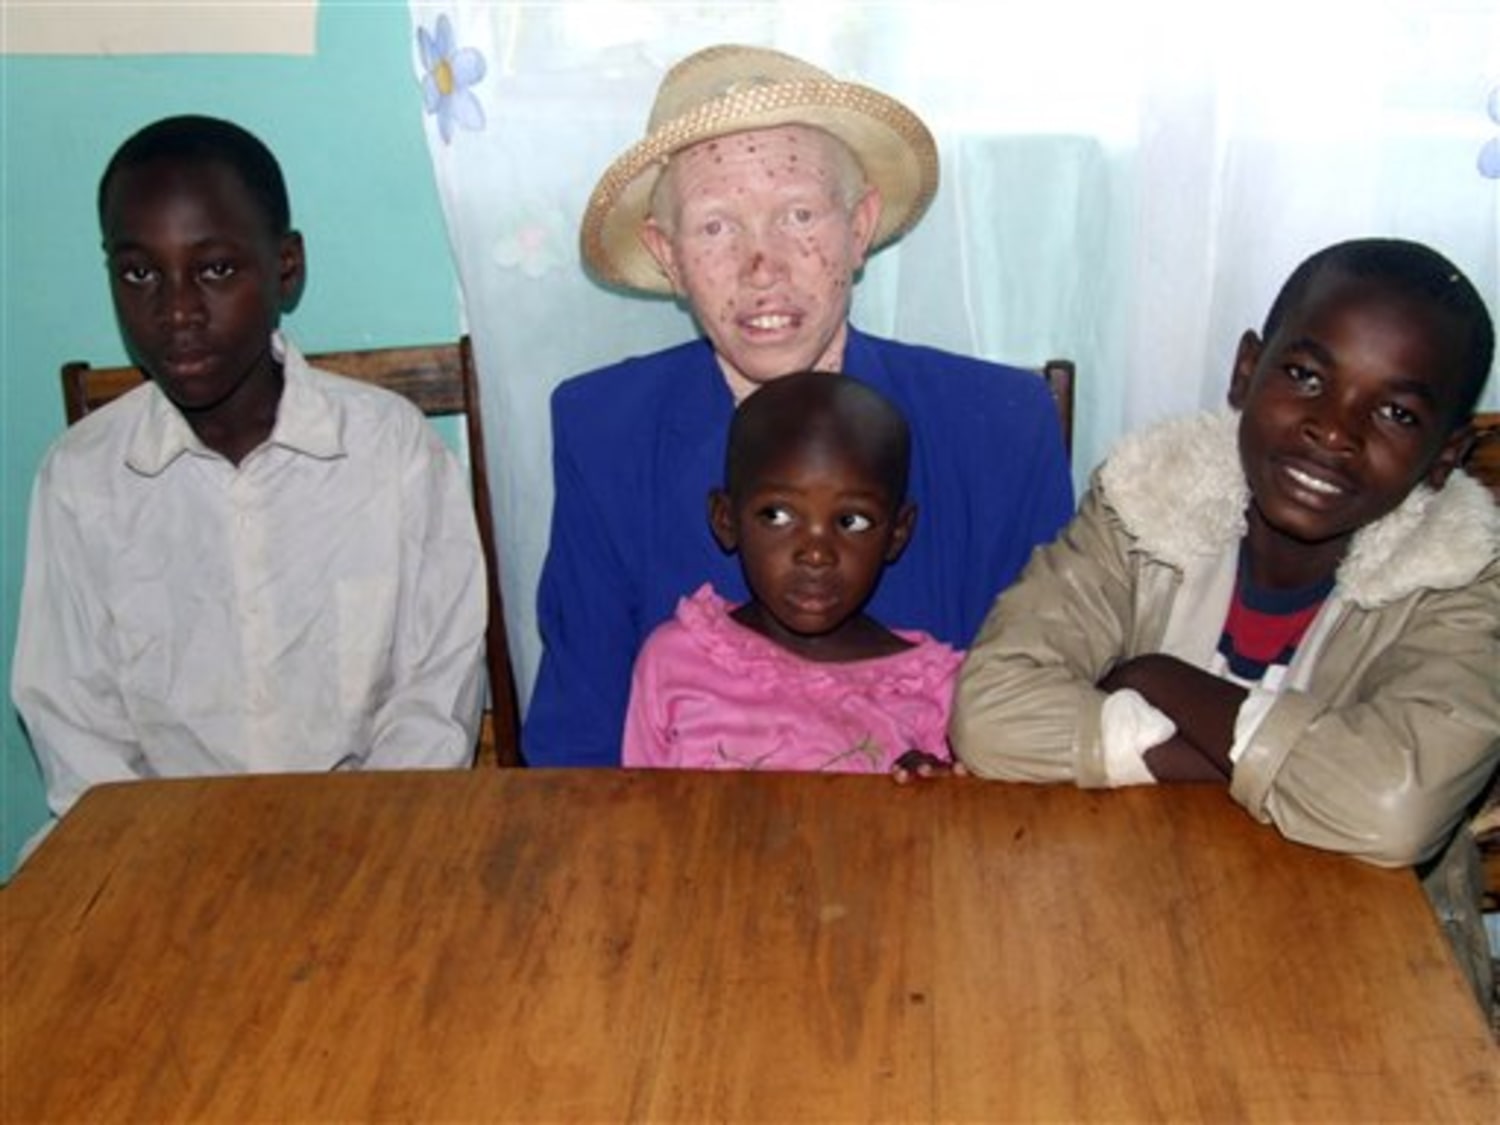 Albinos in East Africa fear for lives after killings